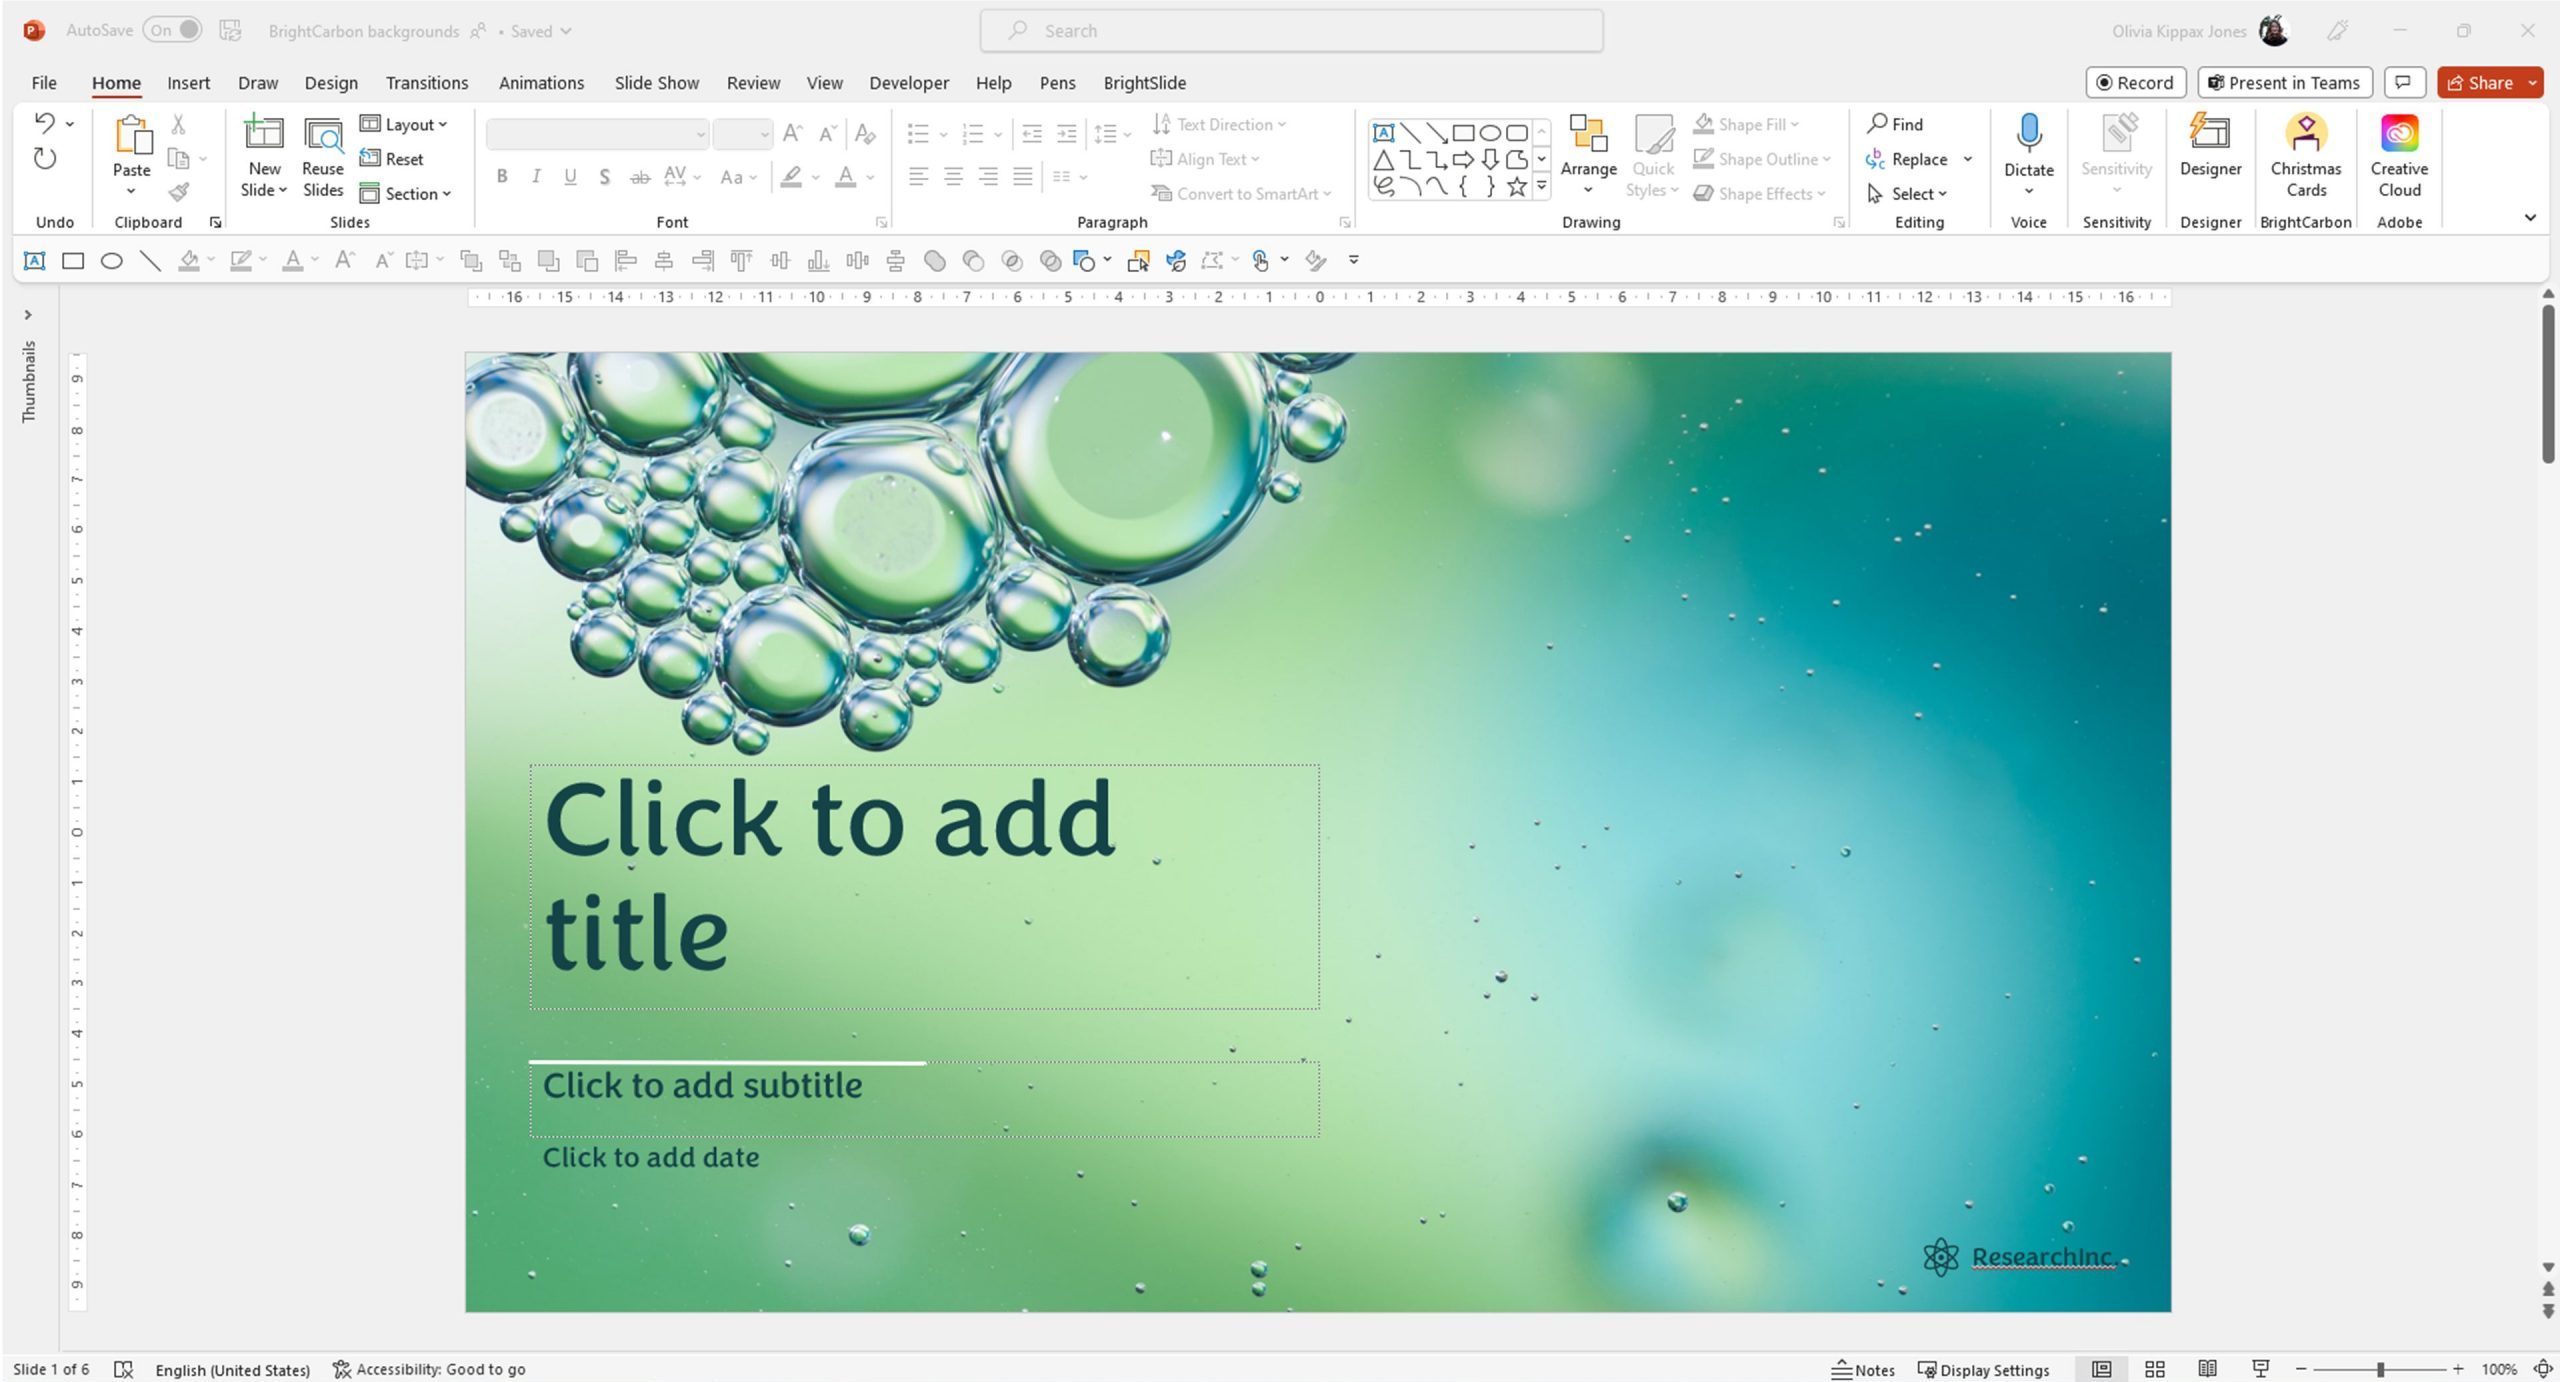 Screenshot of the PowerPoint edit mode. A slide is shown with a clean, professional looking image as the slide background. 